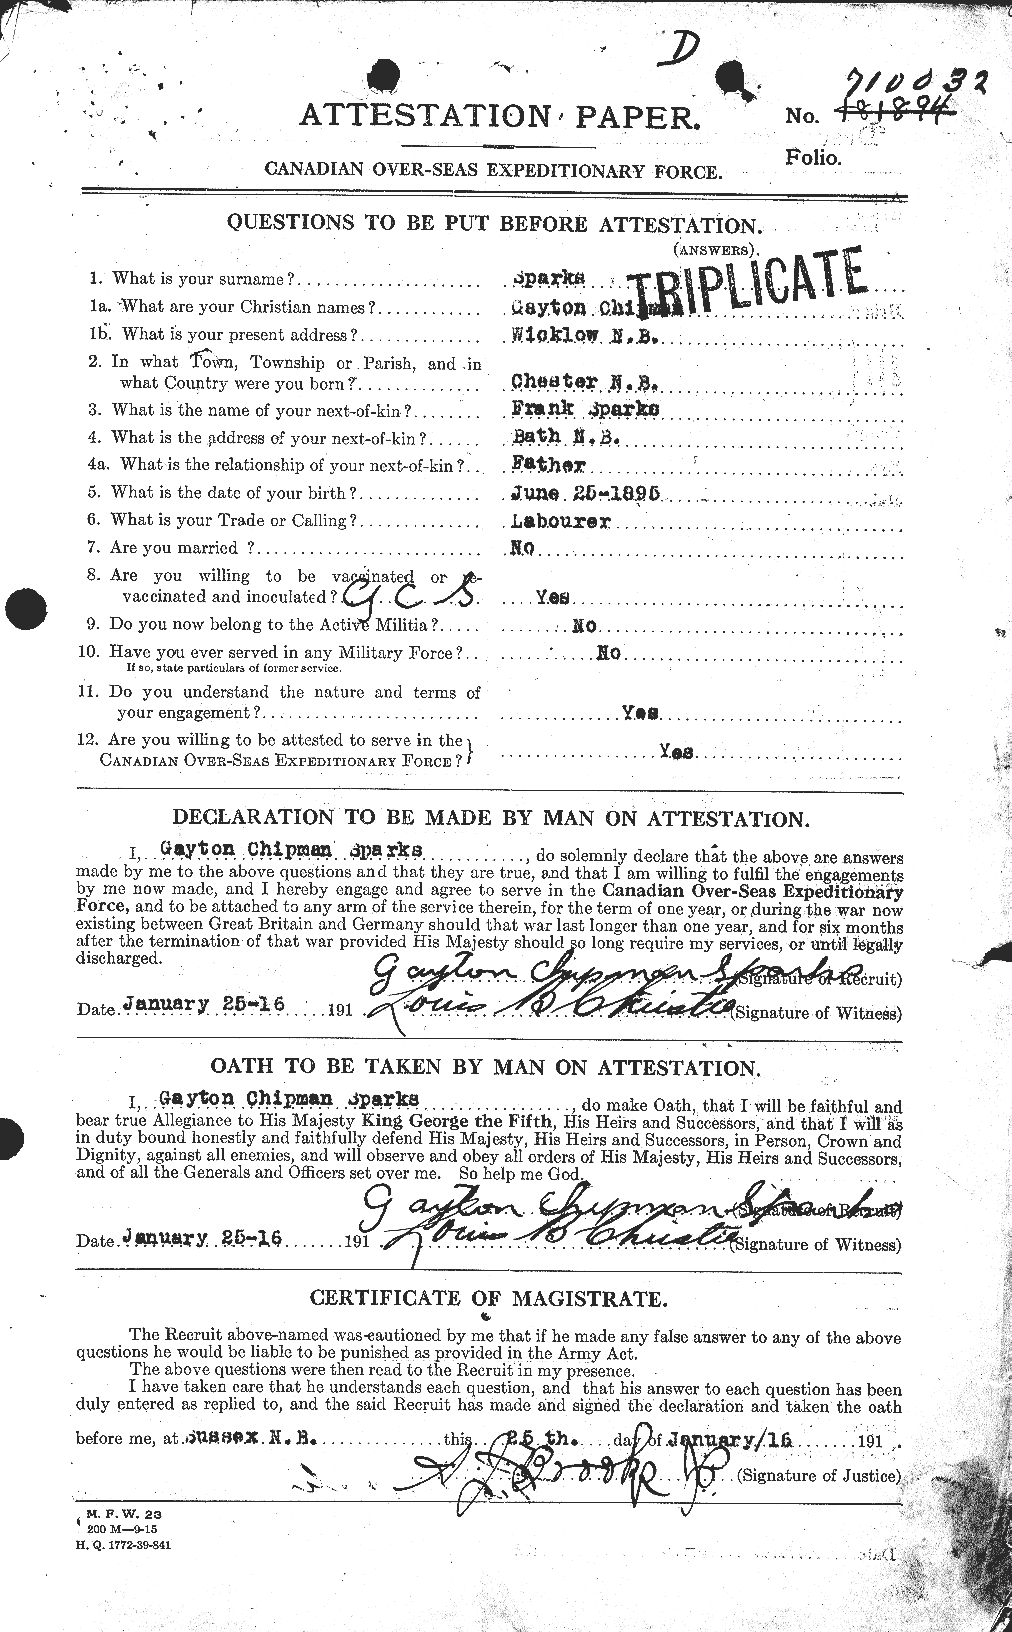 Personnel Records of the First World War - CEF 622312a